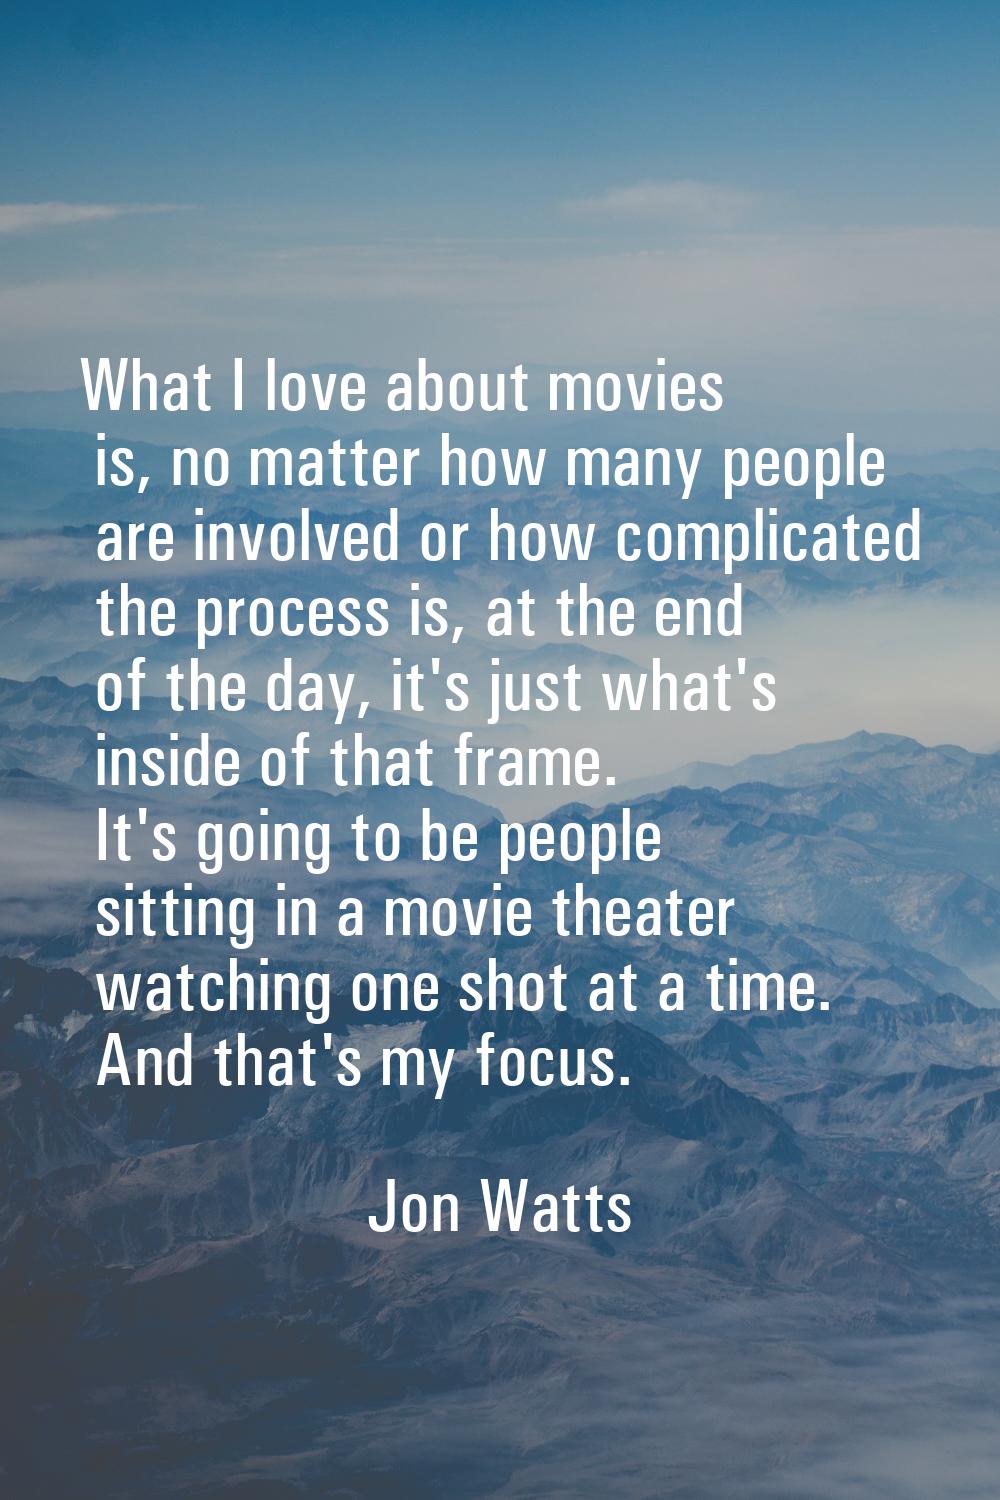 What I love about movies is, no matter how many people are involved or how complicated the process 